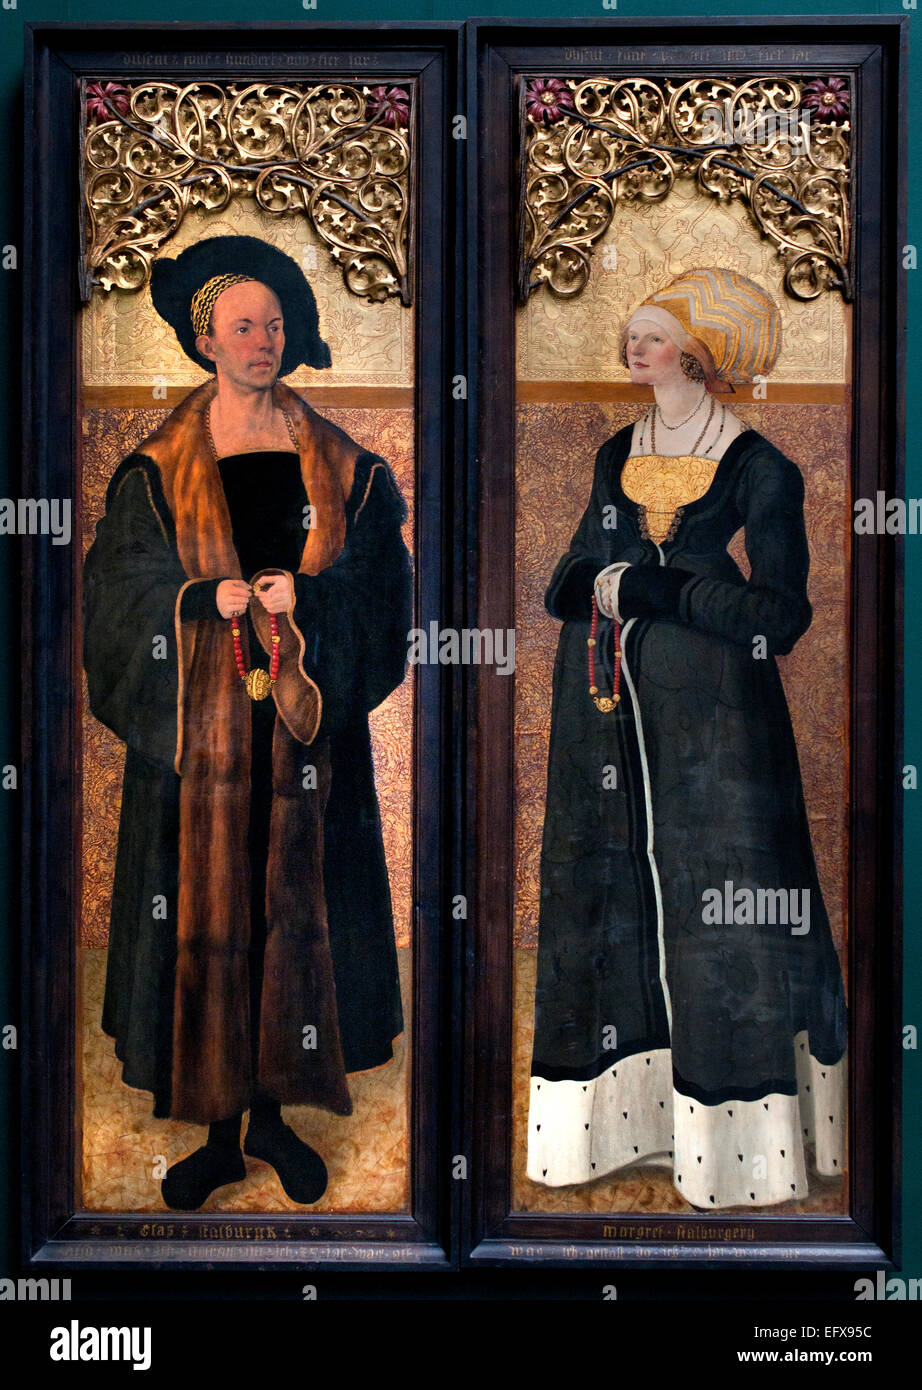 Founder picture of the Frankfurt patrician Claus Stalburg the Rich (1469-1524) and his wife Margarethe vom Rhein 1504  Unknown 'Master of Stalburg-portraits' (probably from the circle of Hans Holbein the Elder) German Germany Stock Photo